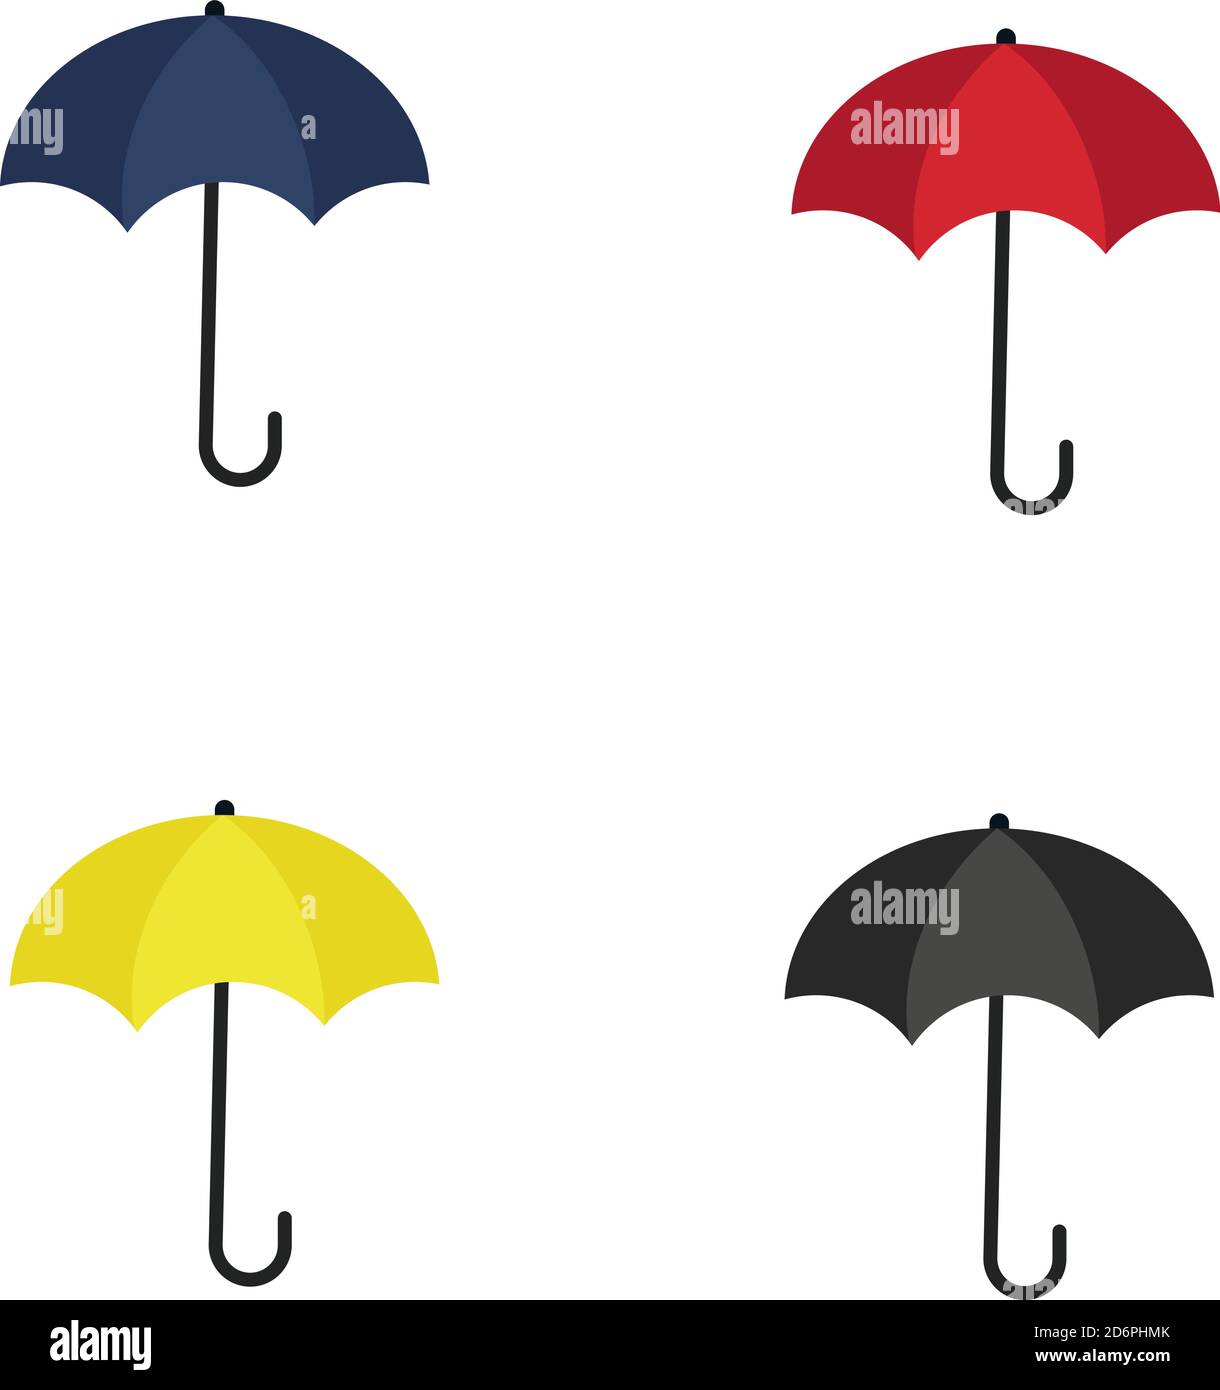 Colorful umbrellas ,illustration, vector on white background. Stock Vector